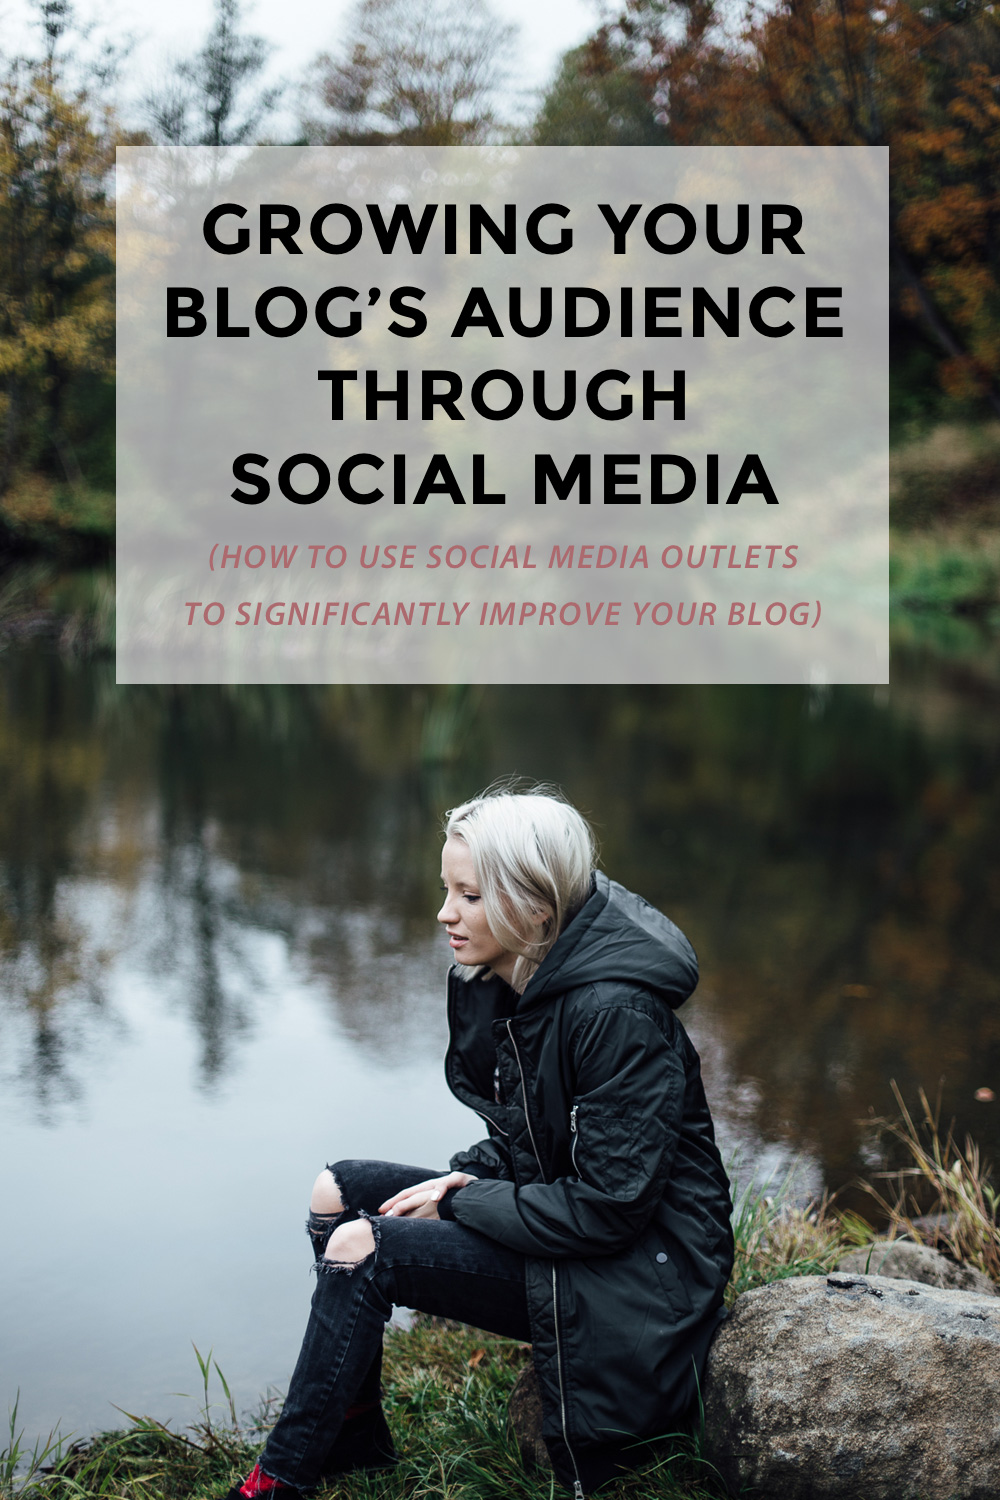 If you're currently trying to grow your blog- social media can improve your stats hugely. Of course, you need to have the right strategy ready. In this post, I'm going to outline some of the top points to keep in mind when growing your blog through social media. Let's go! (blogging tips, business tips, social media for bloggers, social media 101, blogging for profit)